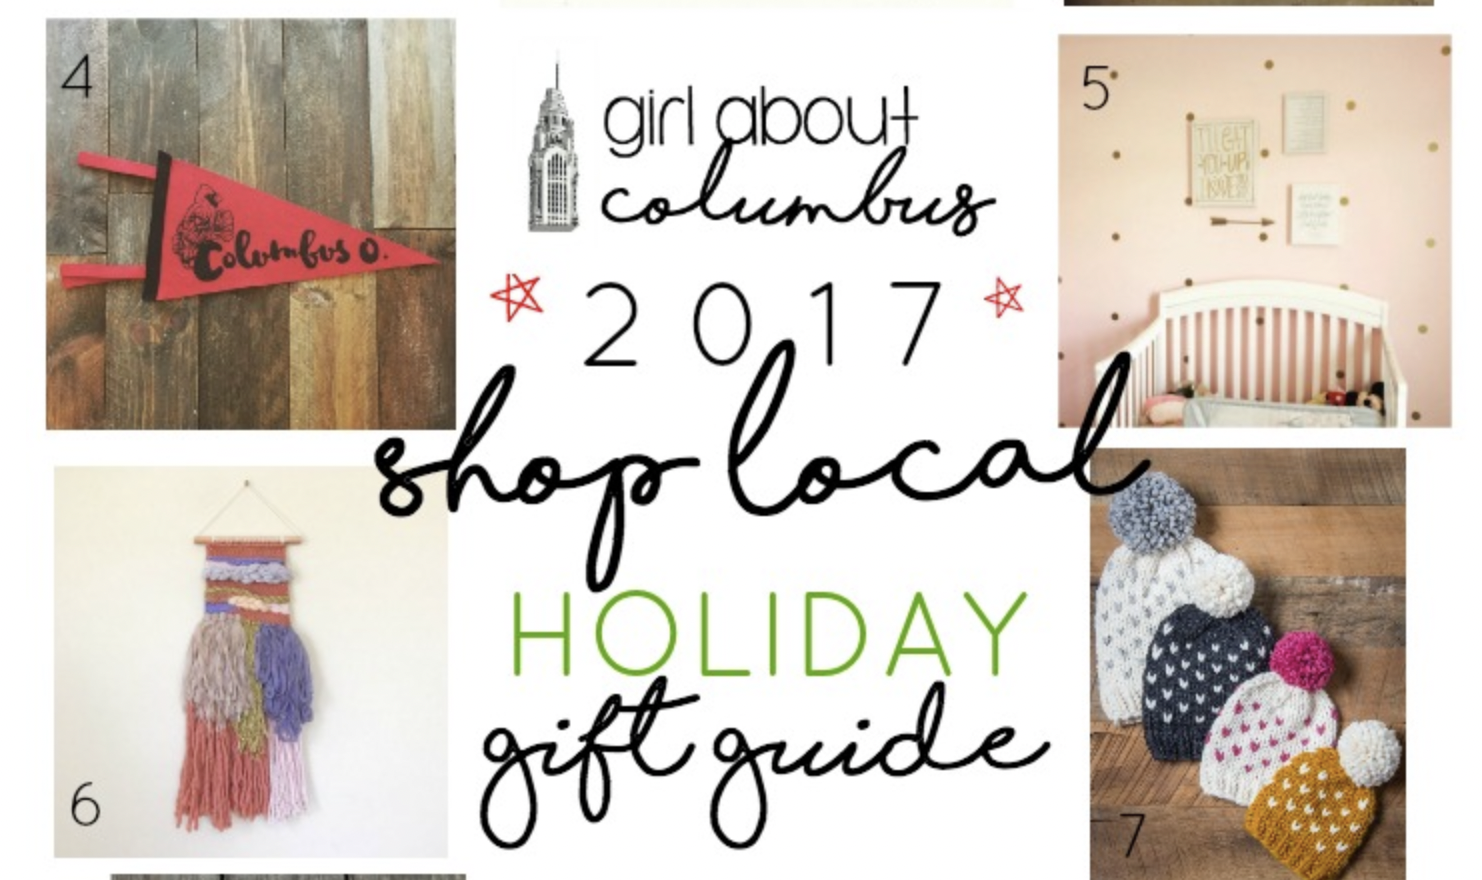 Teaser image of items on the 2017 Girl About Columbus gift guide